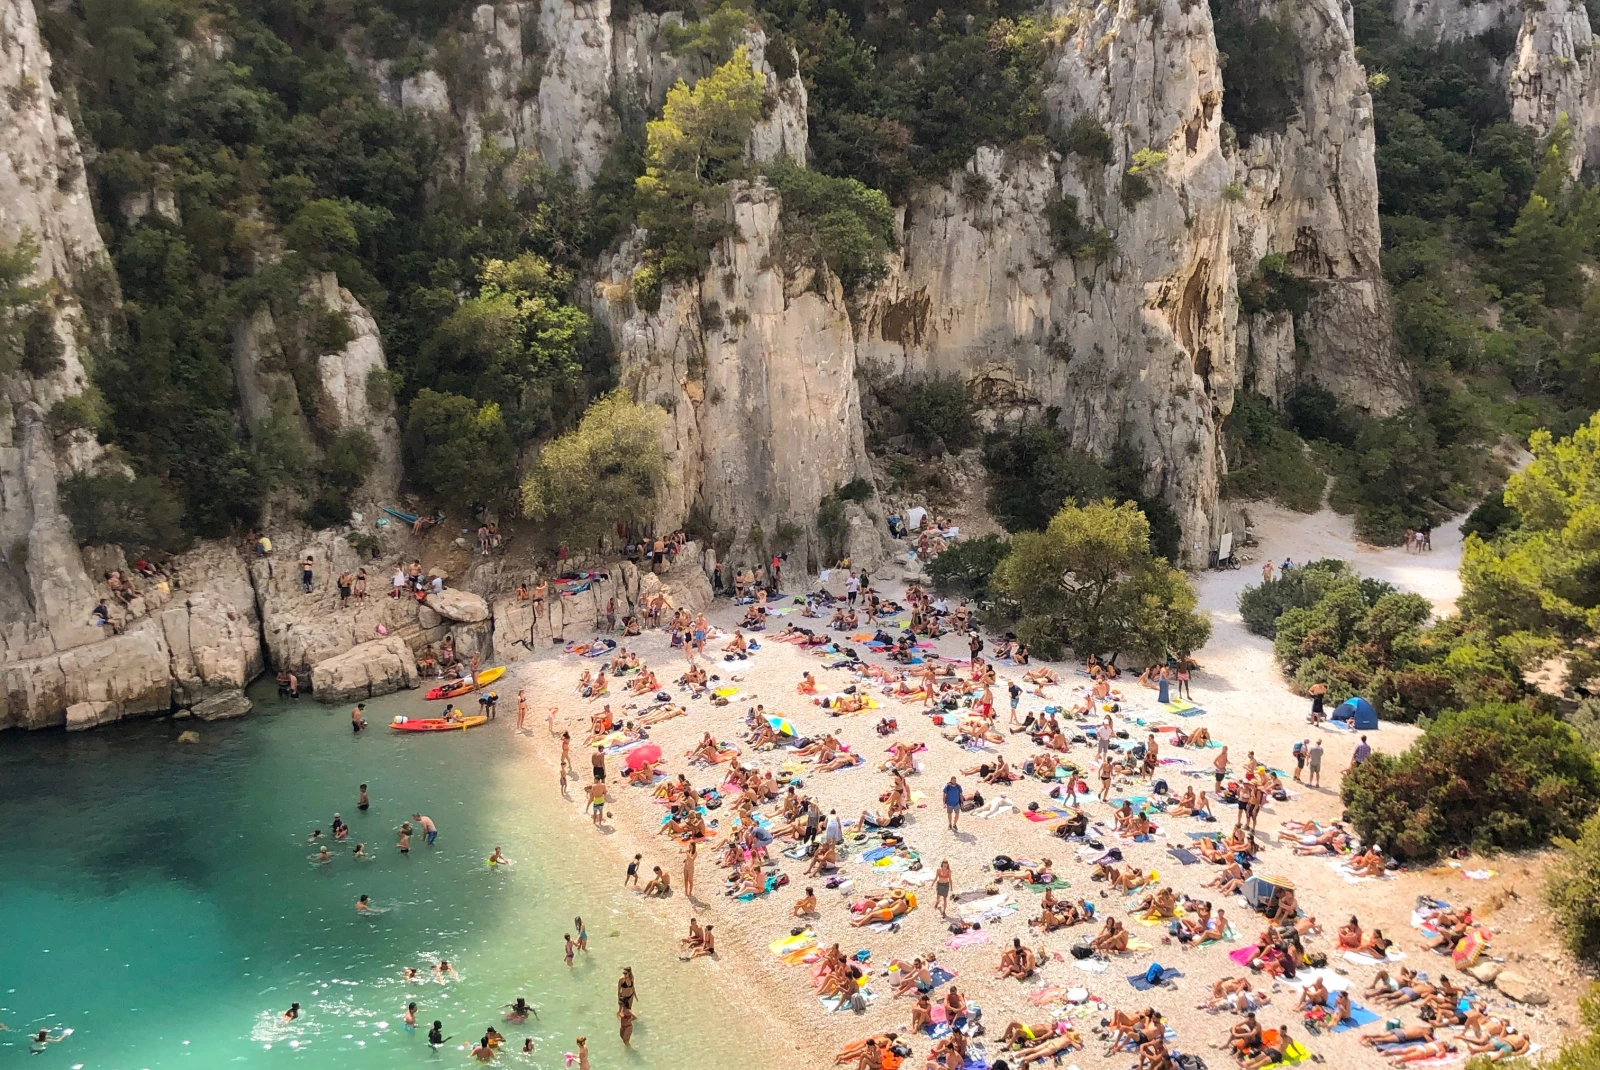 People at the Calanque d’En Vau in Cassie, France